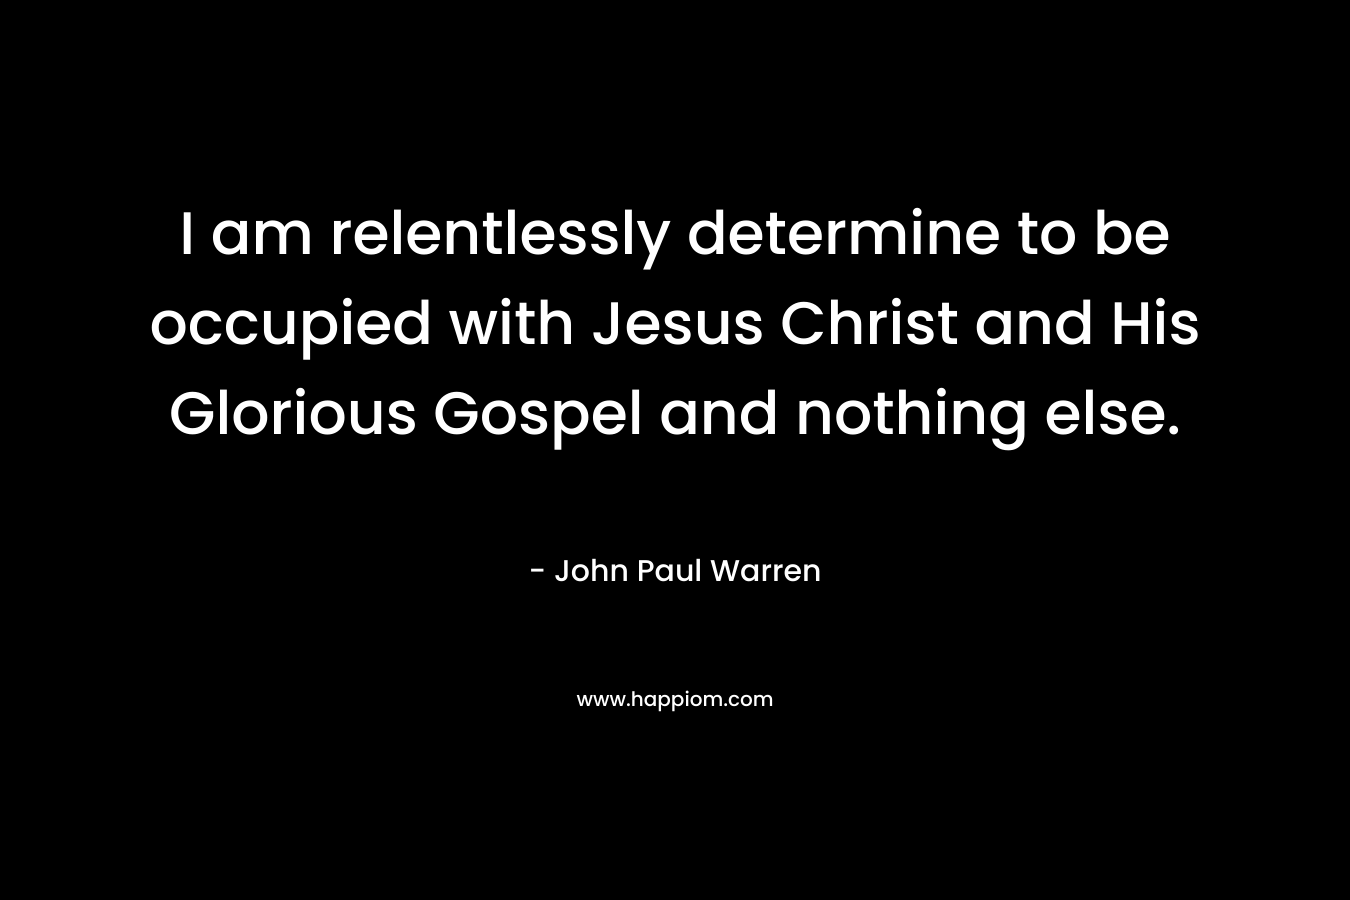 I am relentlessly determine to be occupied with Jesus Christ and His Glorious Gospel and nothing else.